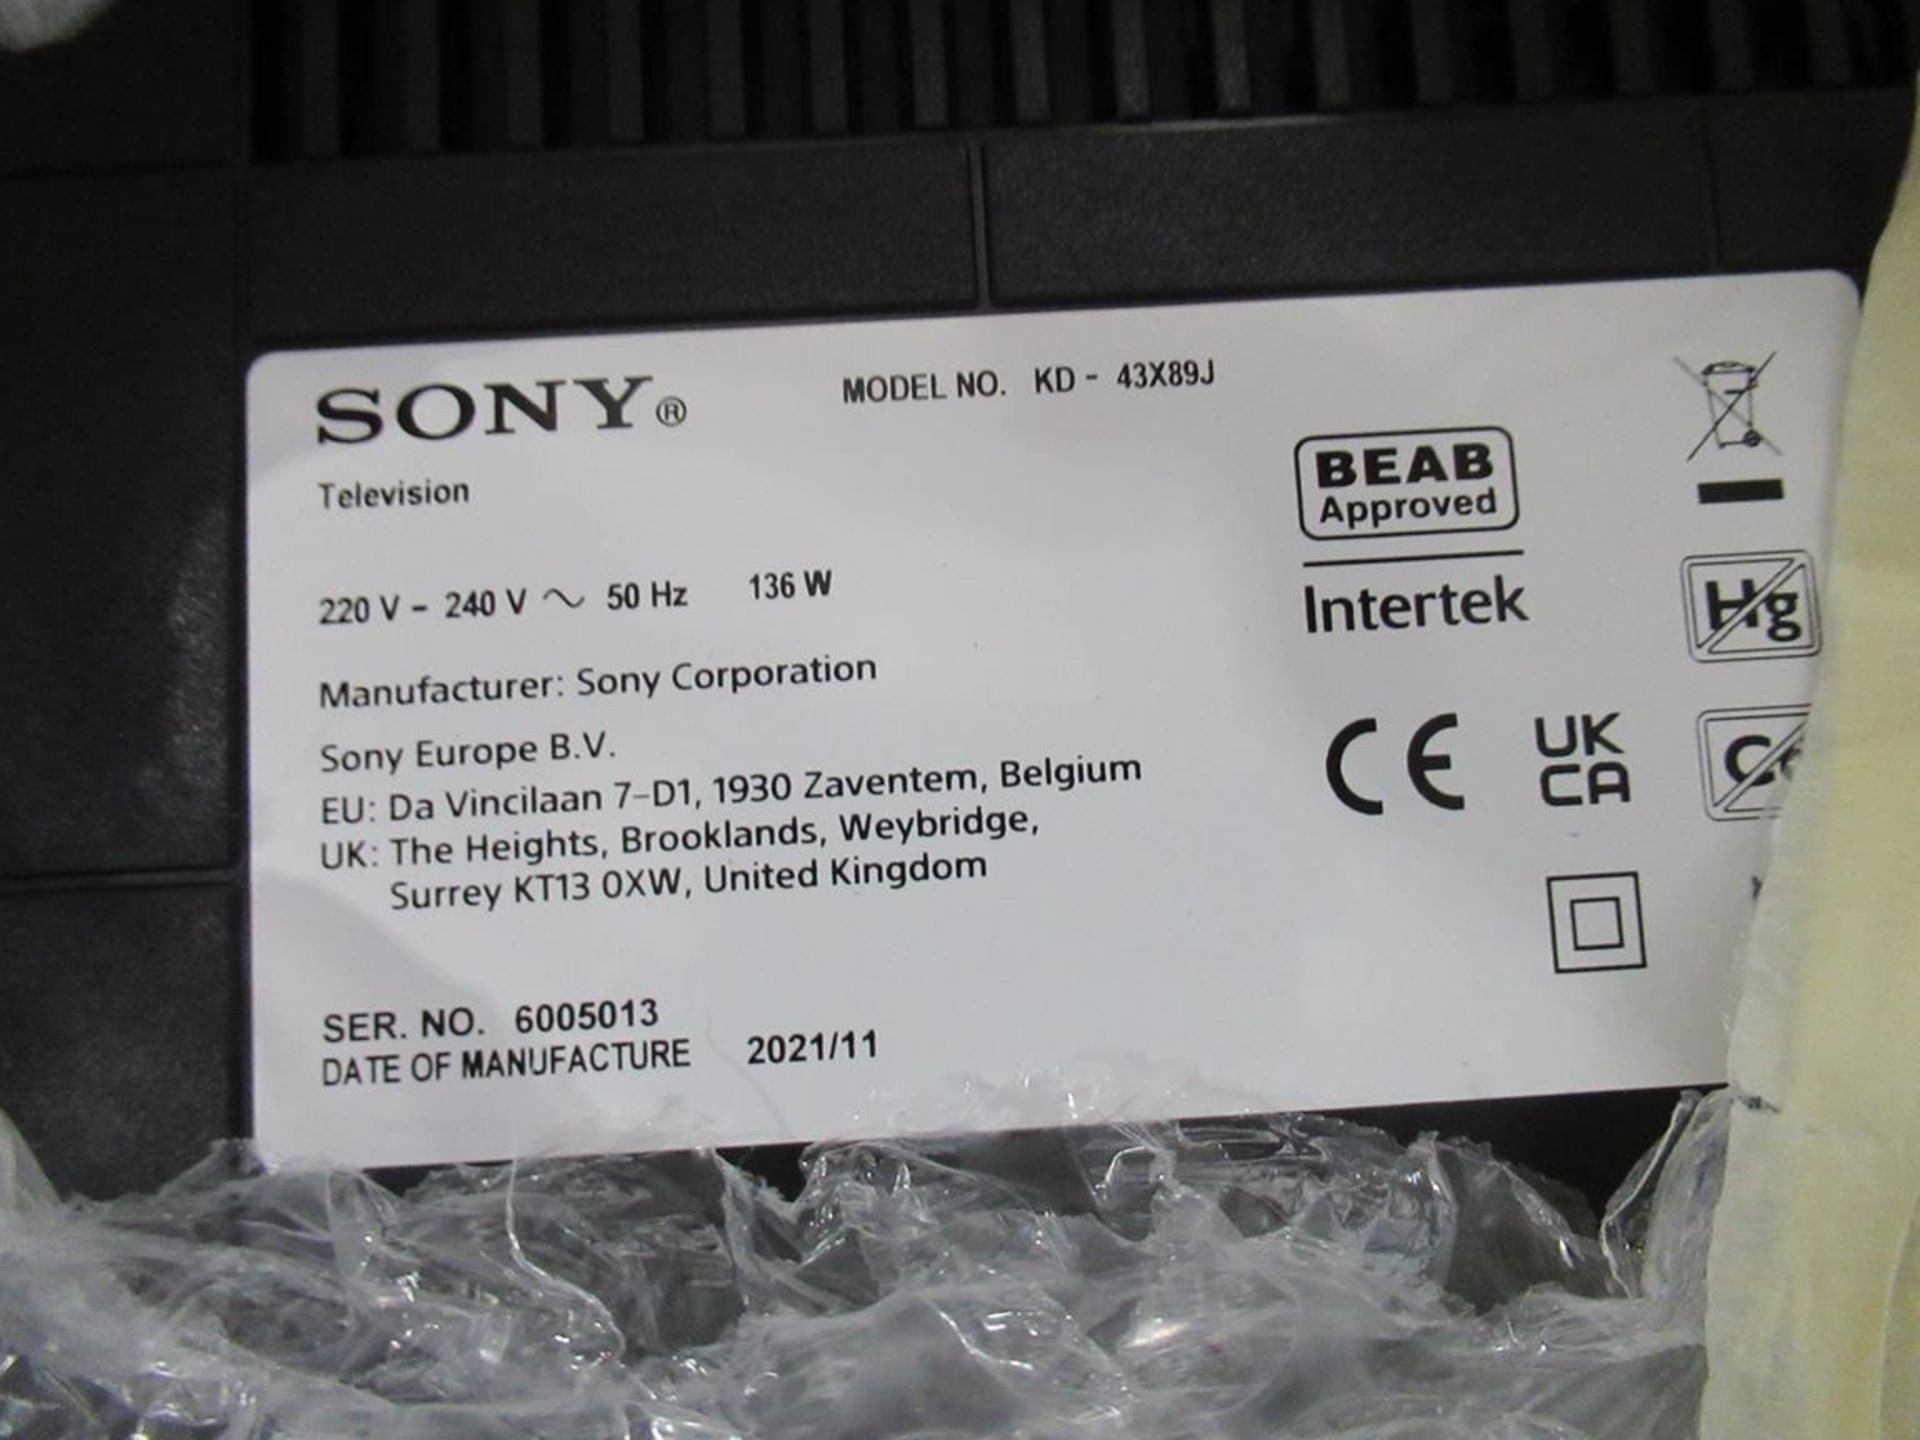 Sony, KD-43X89J 43" television - Image 3 of 4